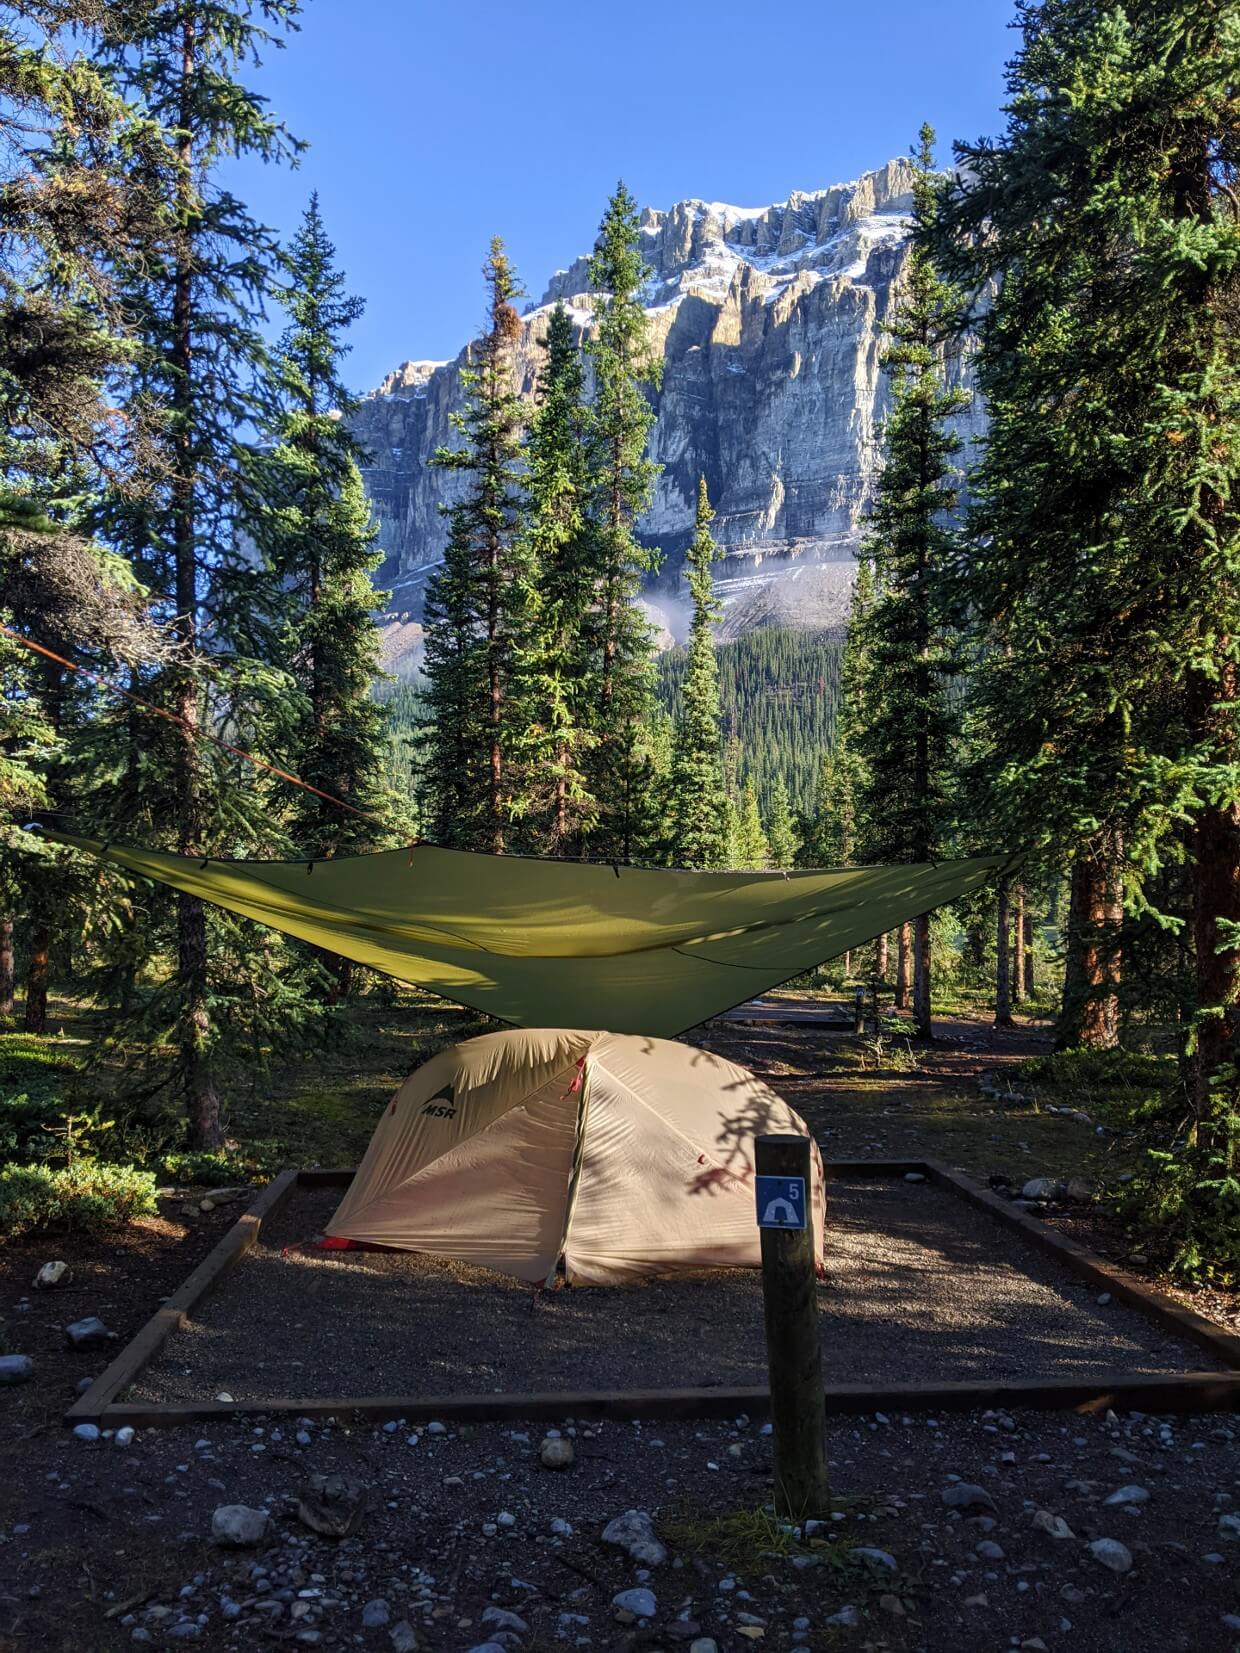 A tent is set up underneath a tarp on tent pad, surrounded by forest with mountains in background